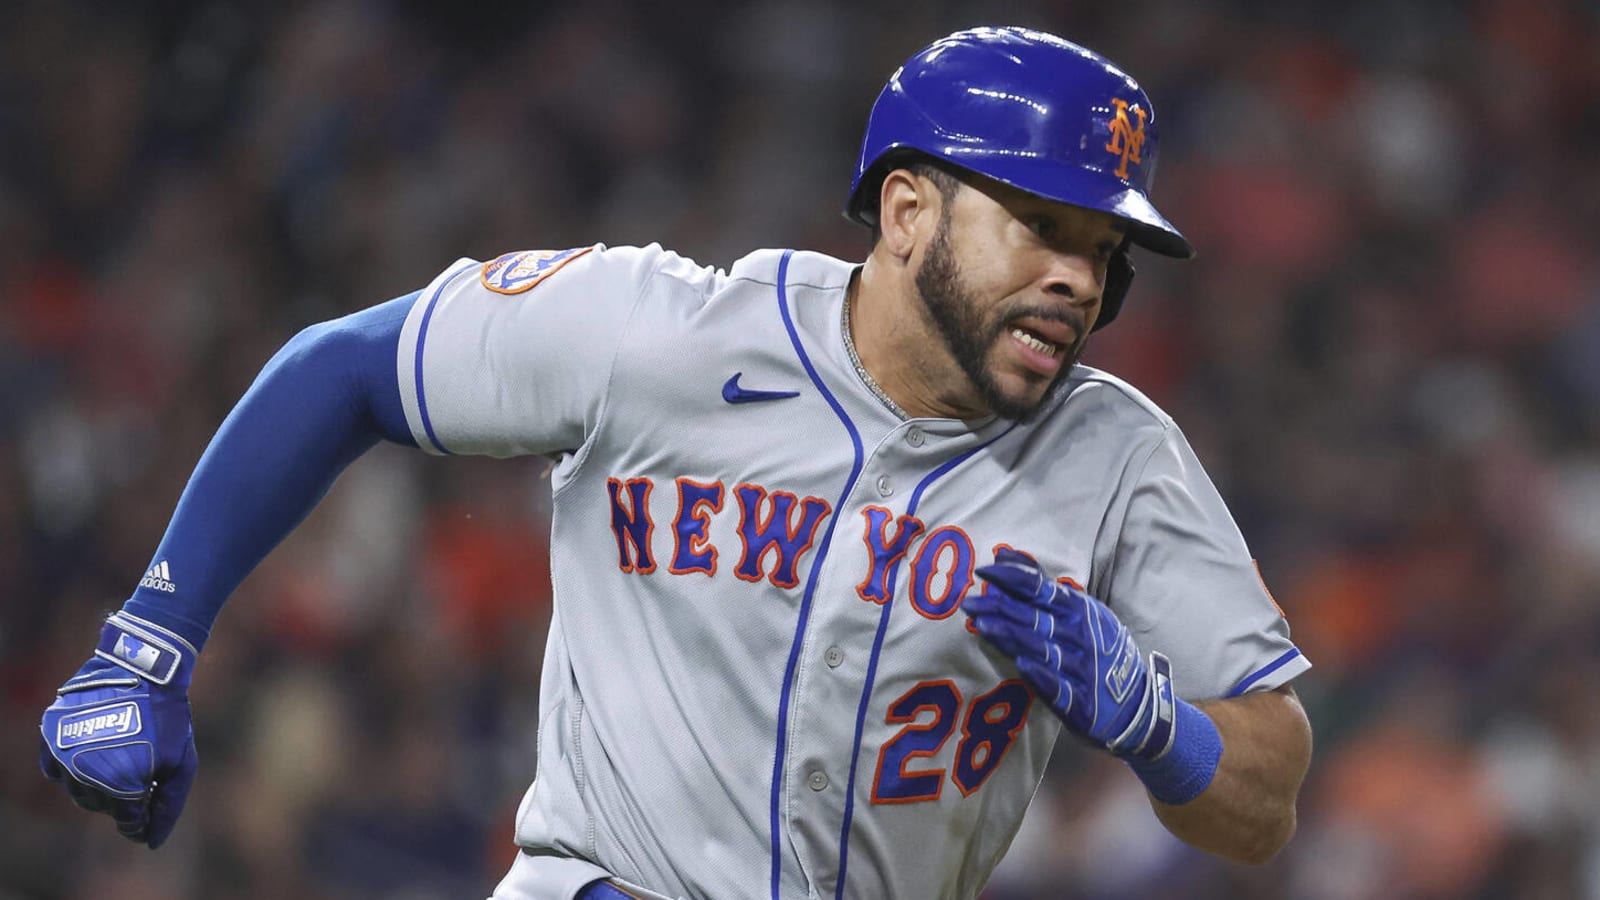 Can the Mets still compete for a playoff spot despite the sell-off?